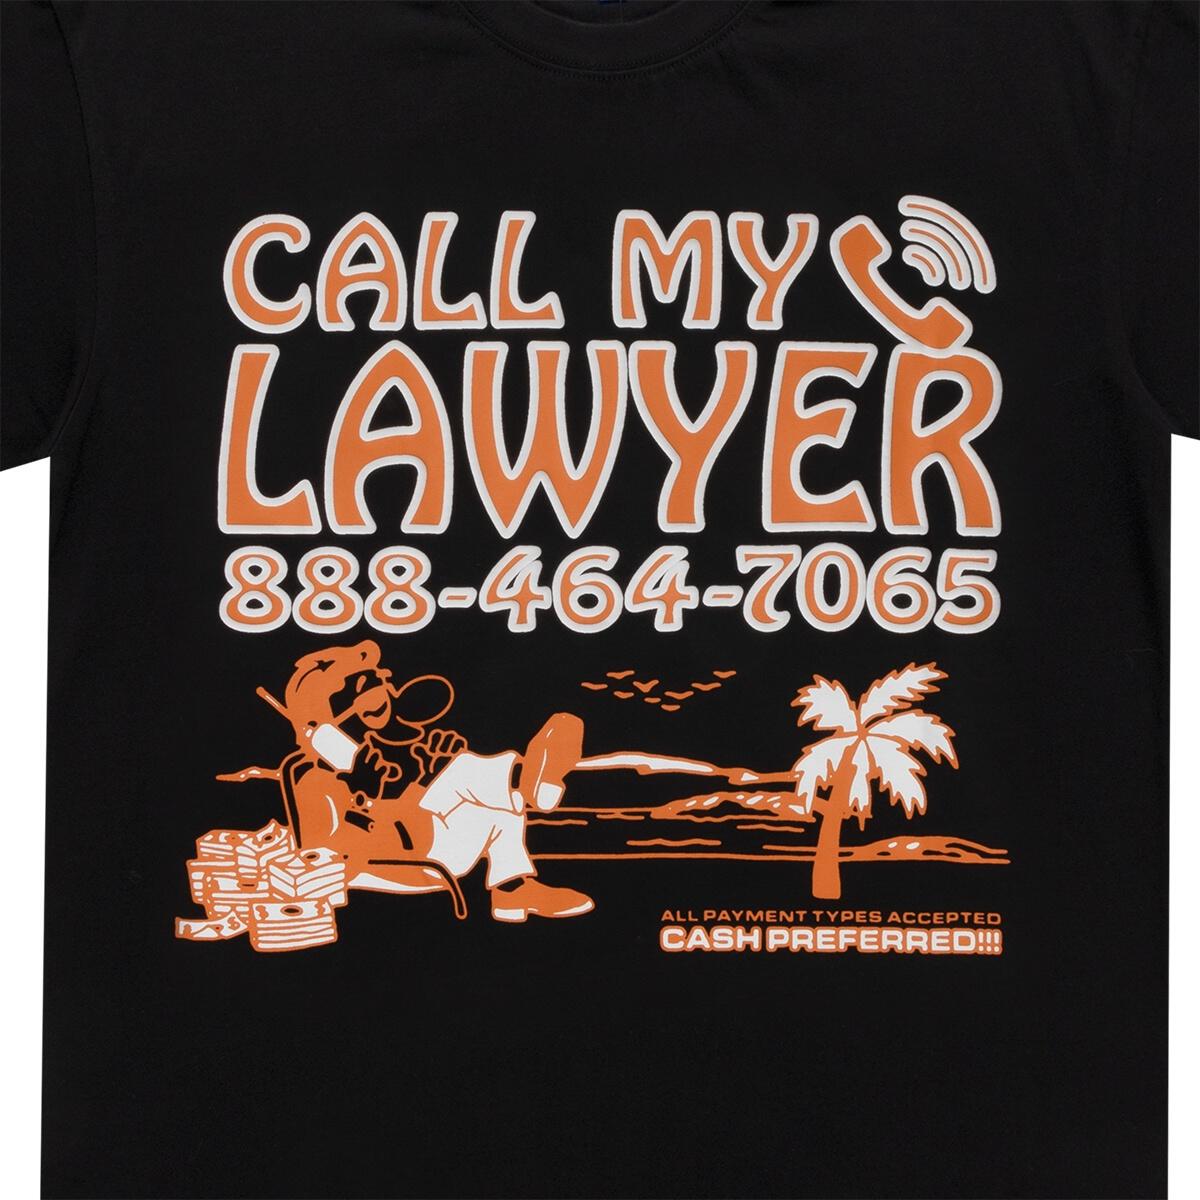 Off Shore Lawyer Tee - Black